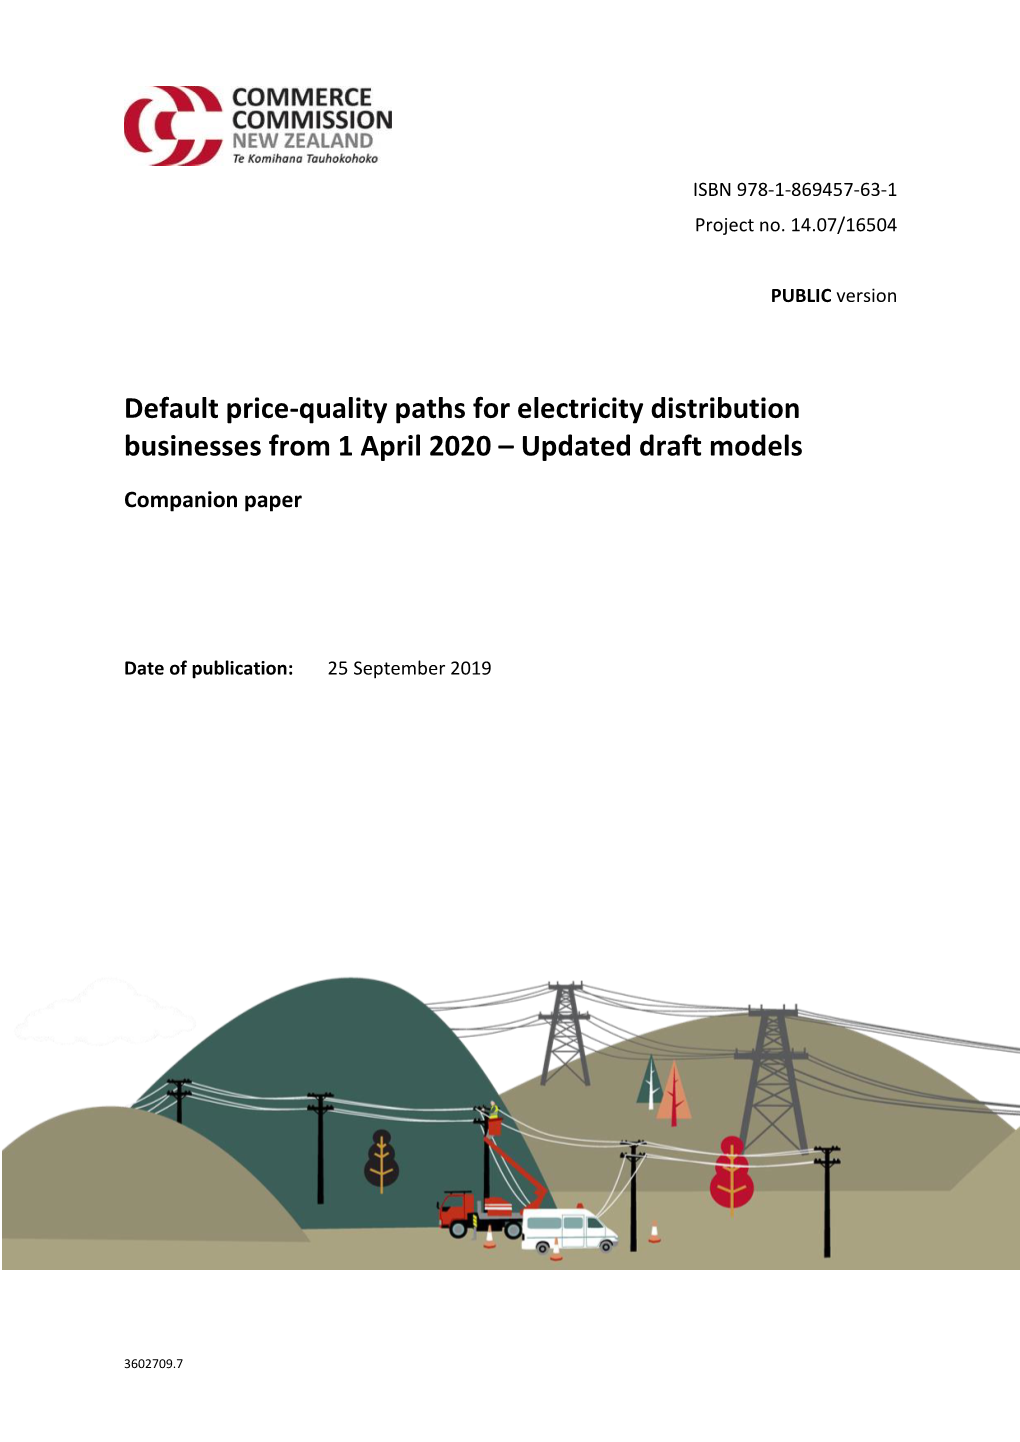 Default Price-Quality Paths for Electricity Distribution Businesses from 1 April 2020 – Updated Draft Models